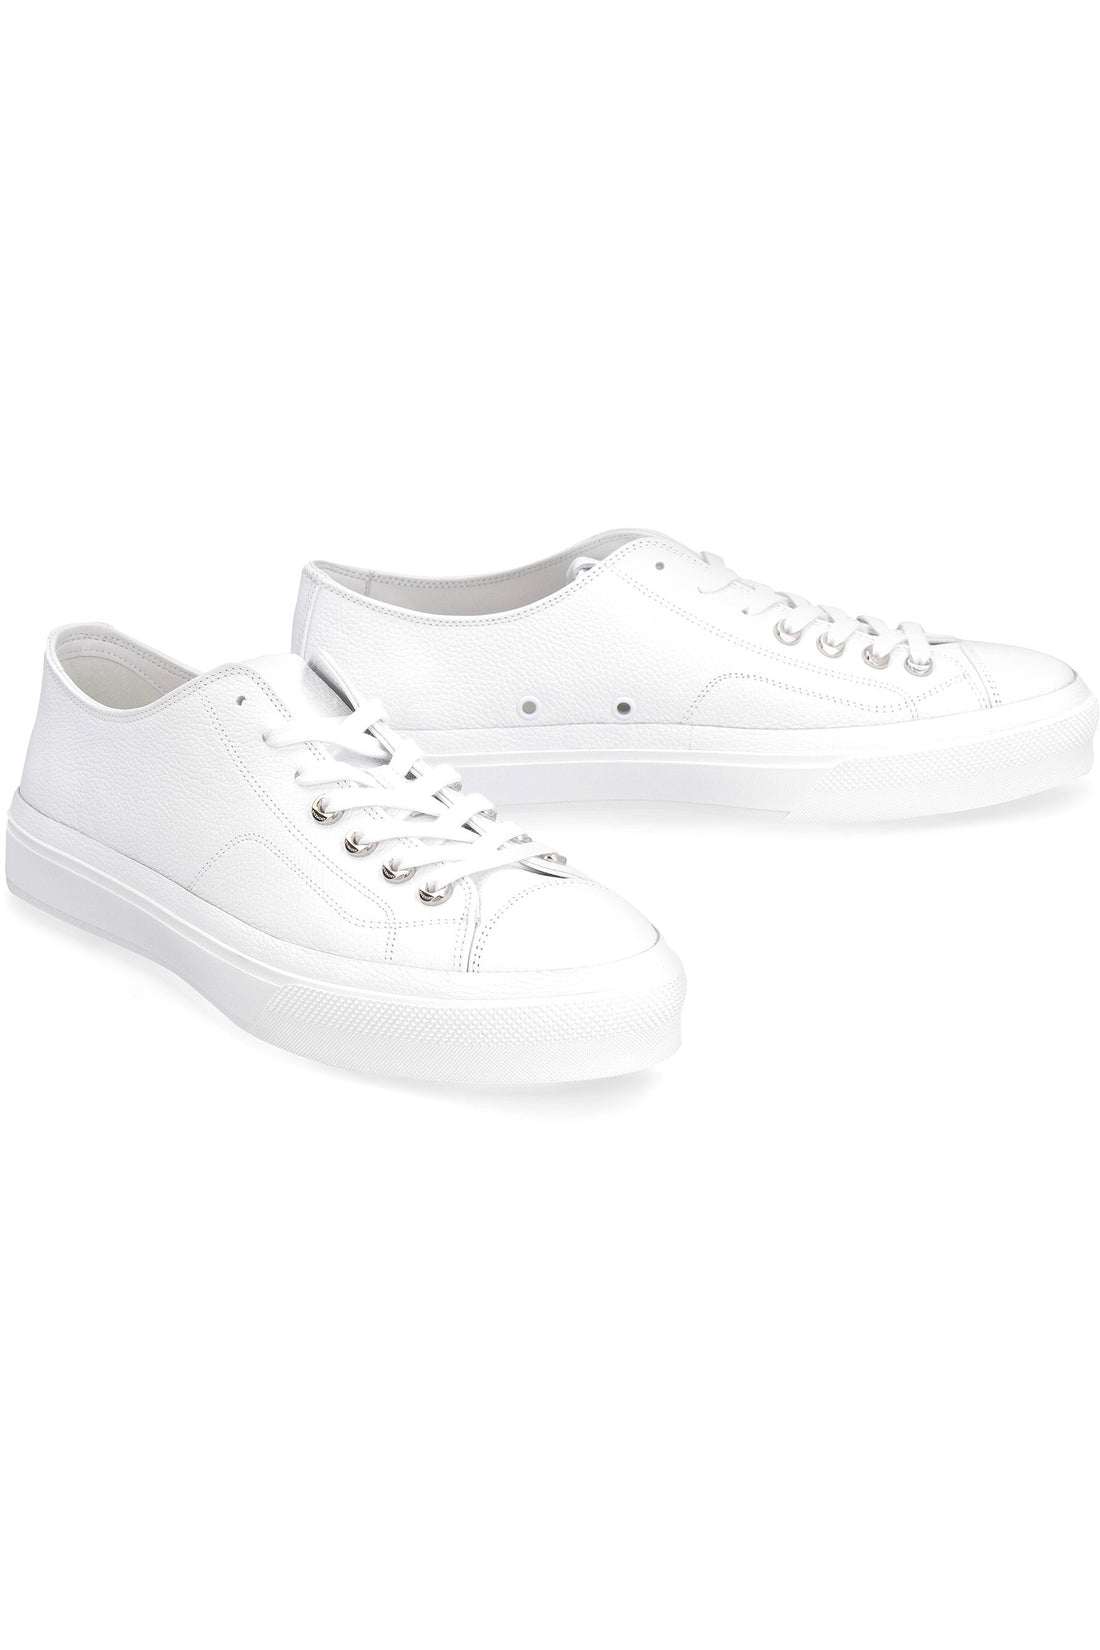 Givenchy-OUTLET-SALE-City low-top sneakers-ARCHIVIST